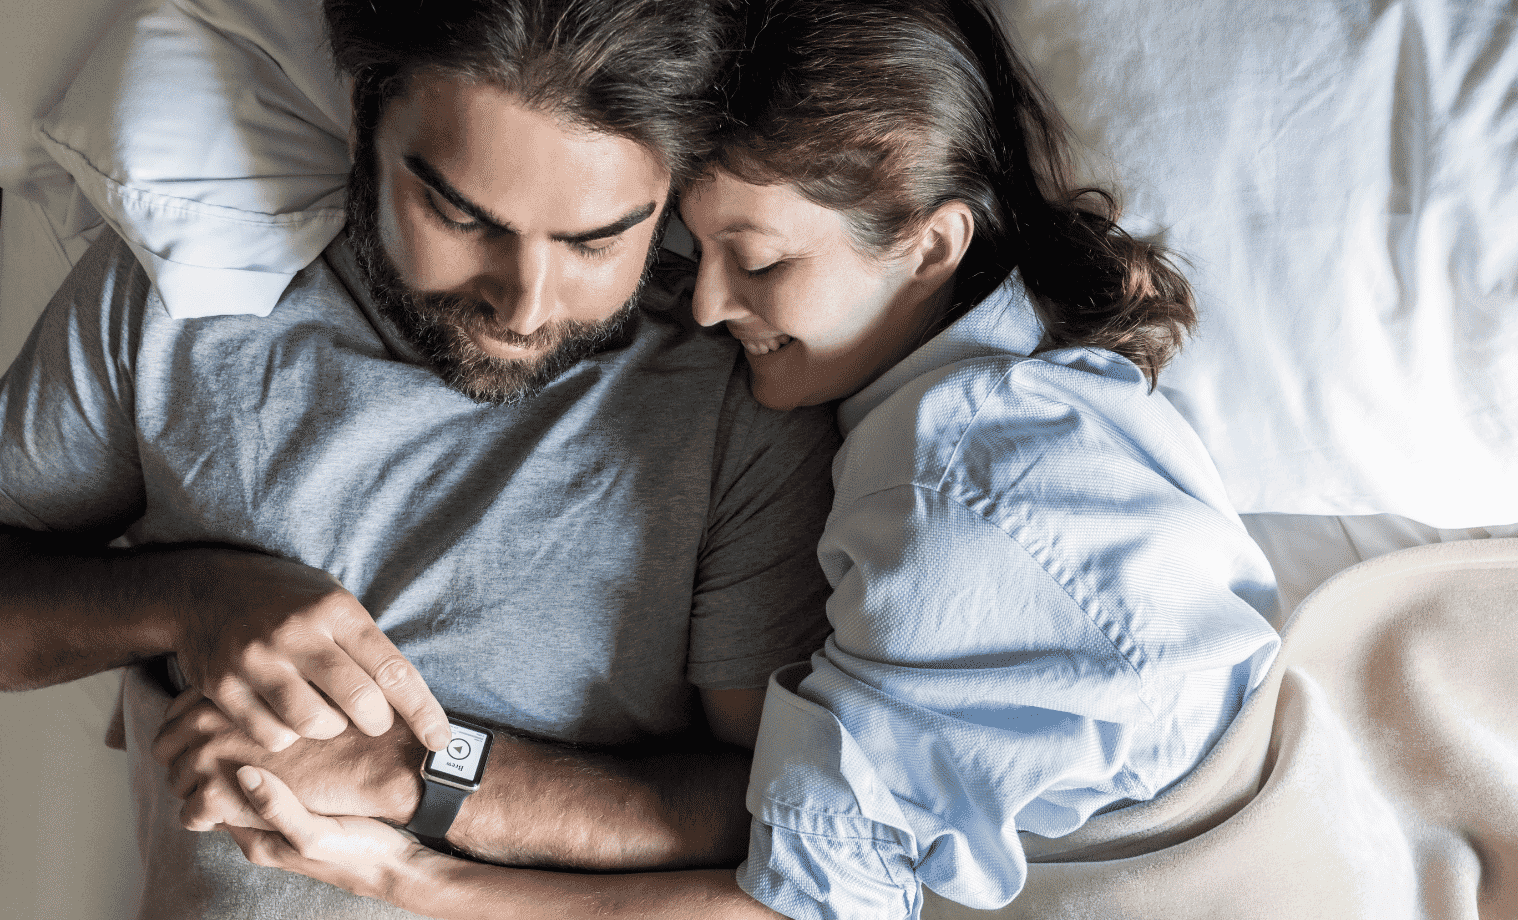 A man and woman lay in bed together and examine the man's smart watch.